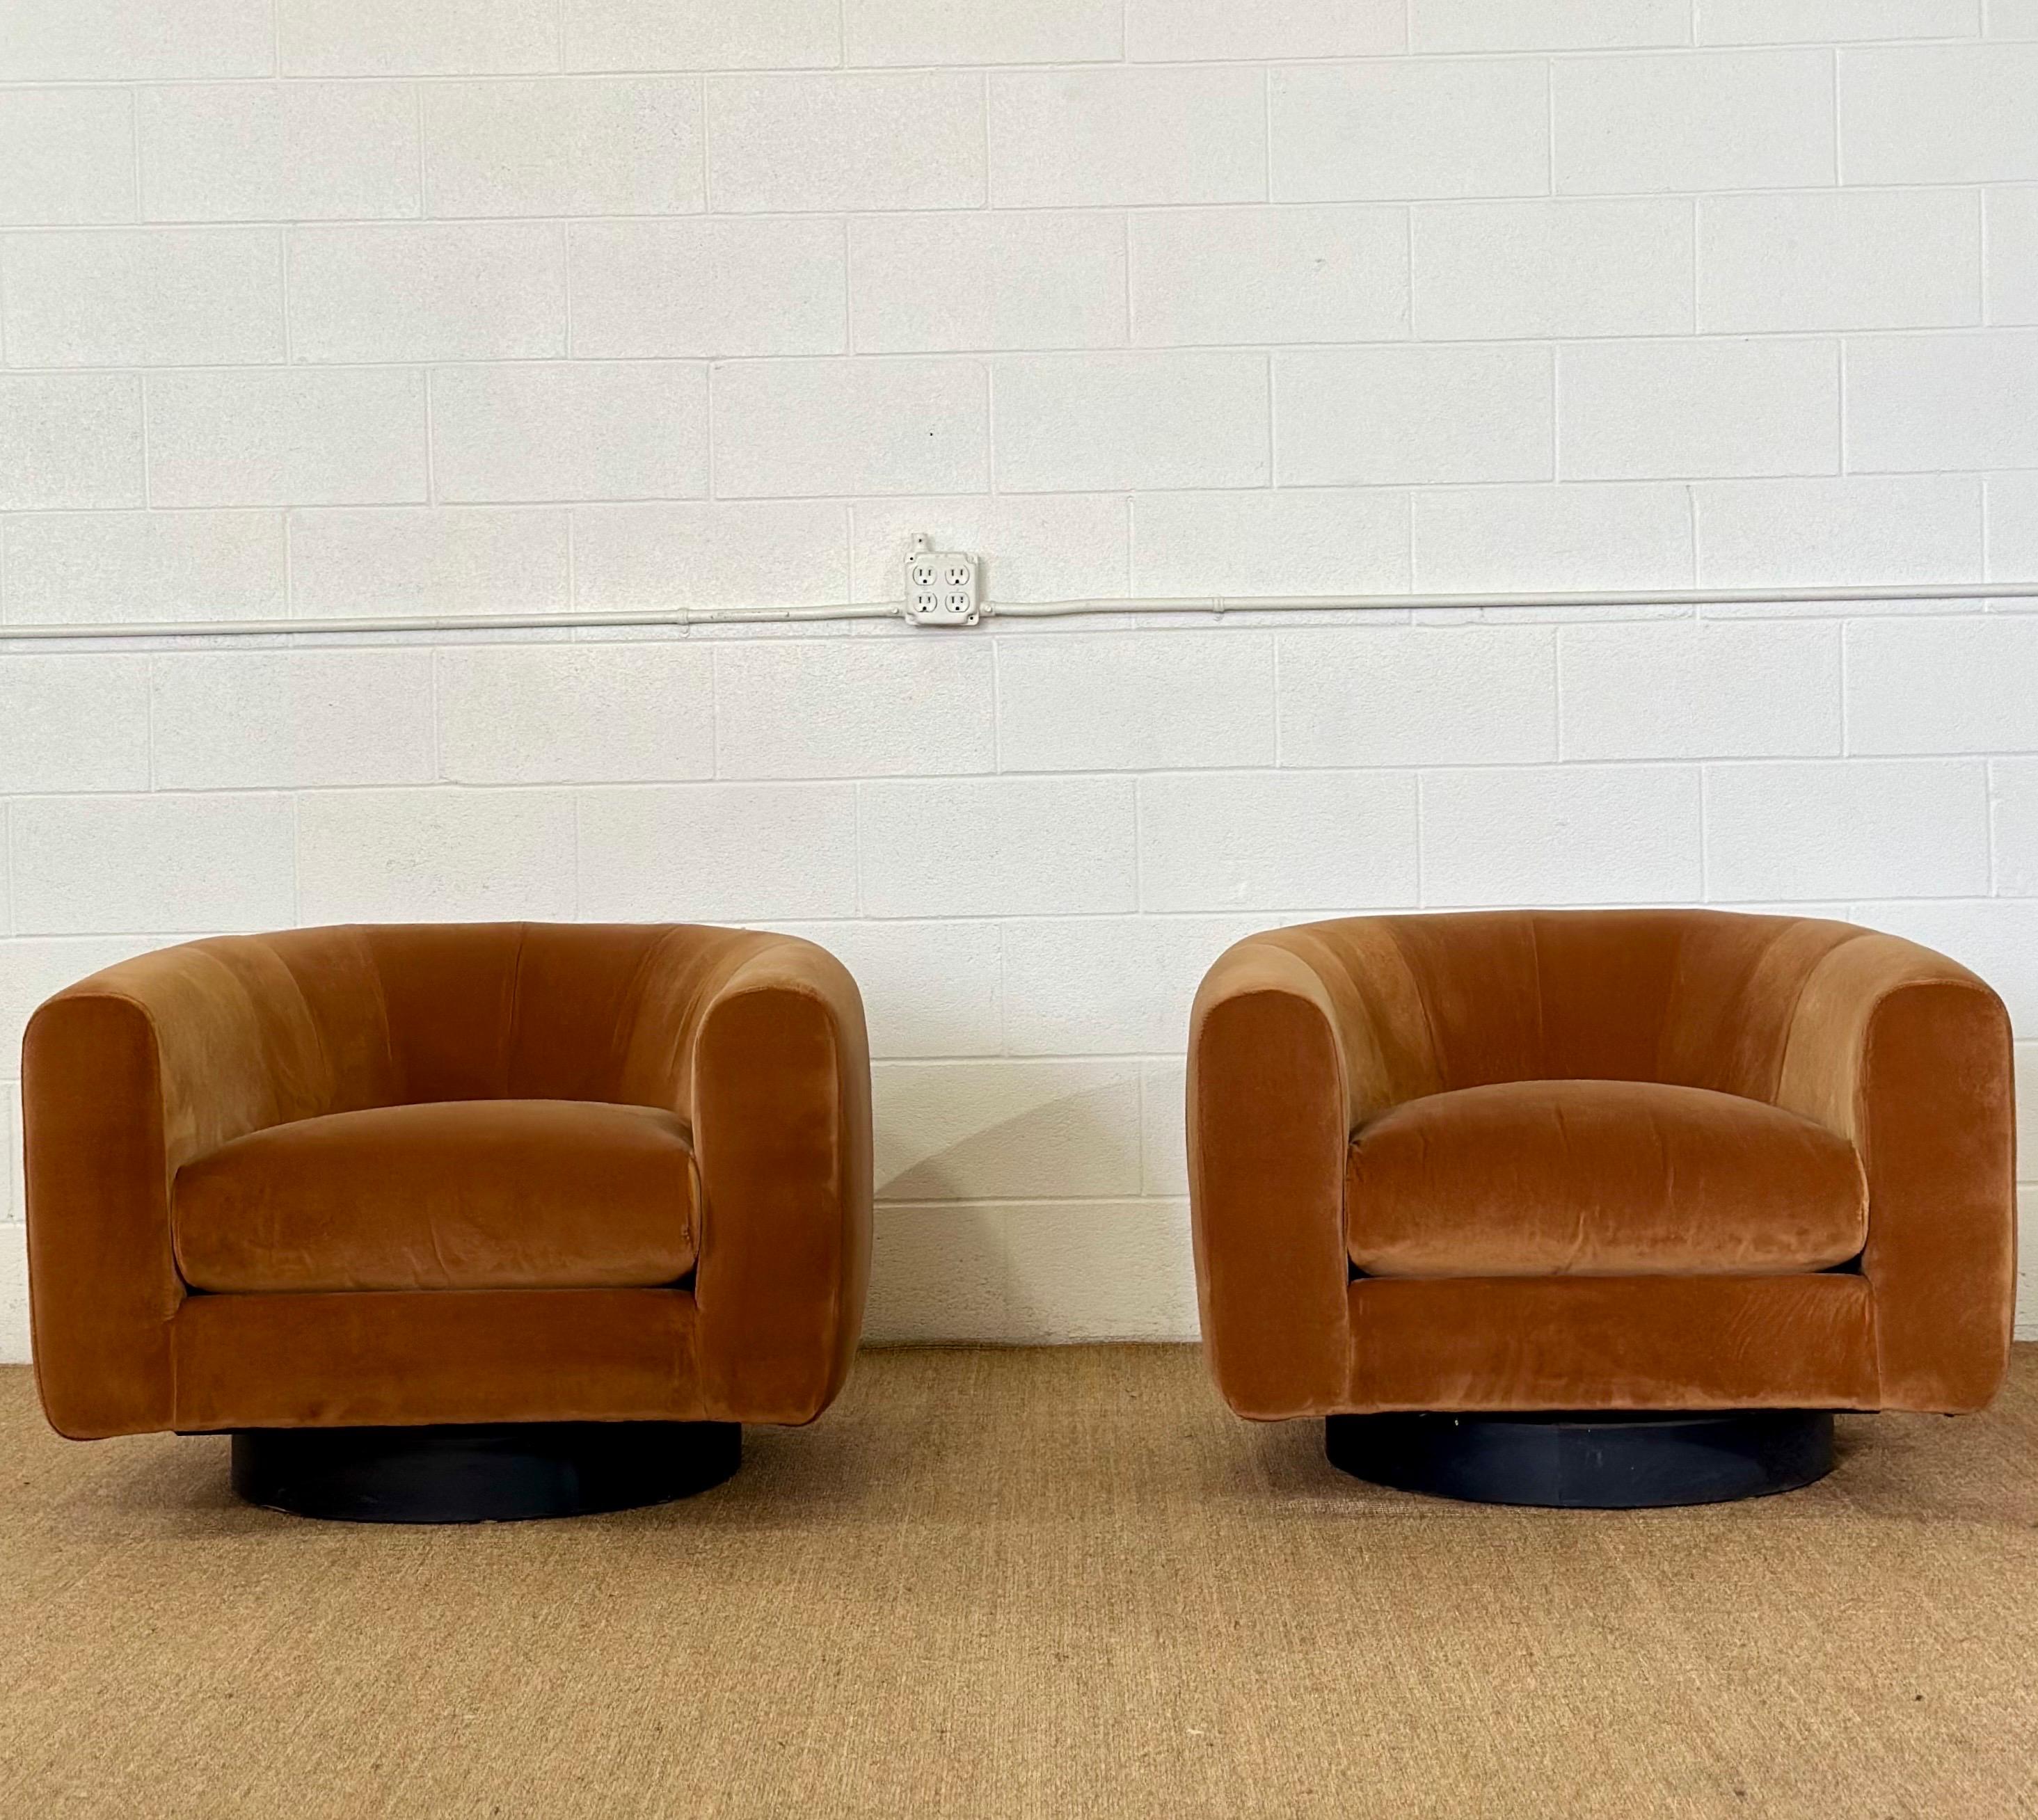 We are very pleased to offer a stunning pair of barrel back chairs in the style of Milo Baughman, circa the 1970s.  Each exquisite chair is anchored upon a sleek black wooden plinth, giving the illusion that the chair is gracefully floating just